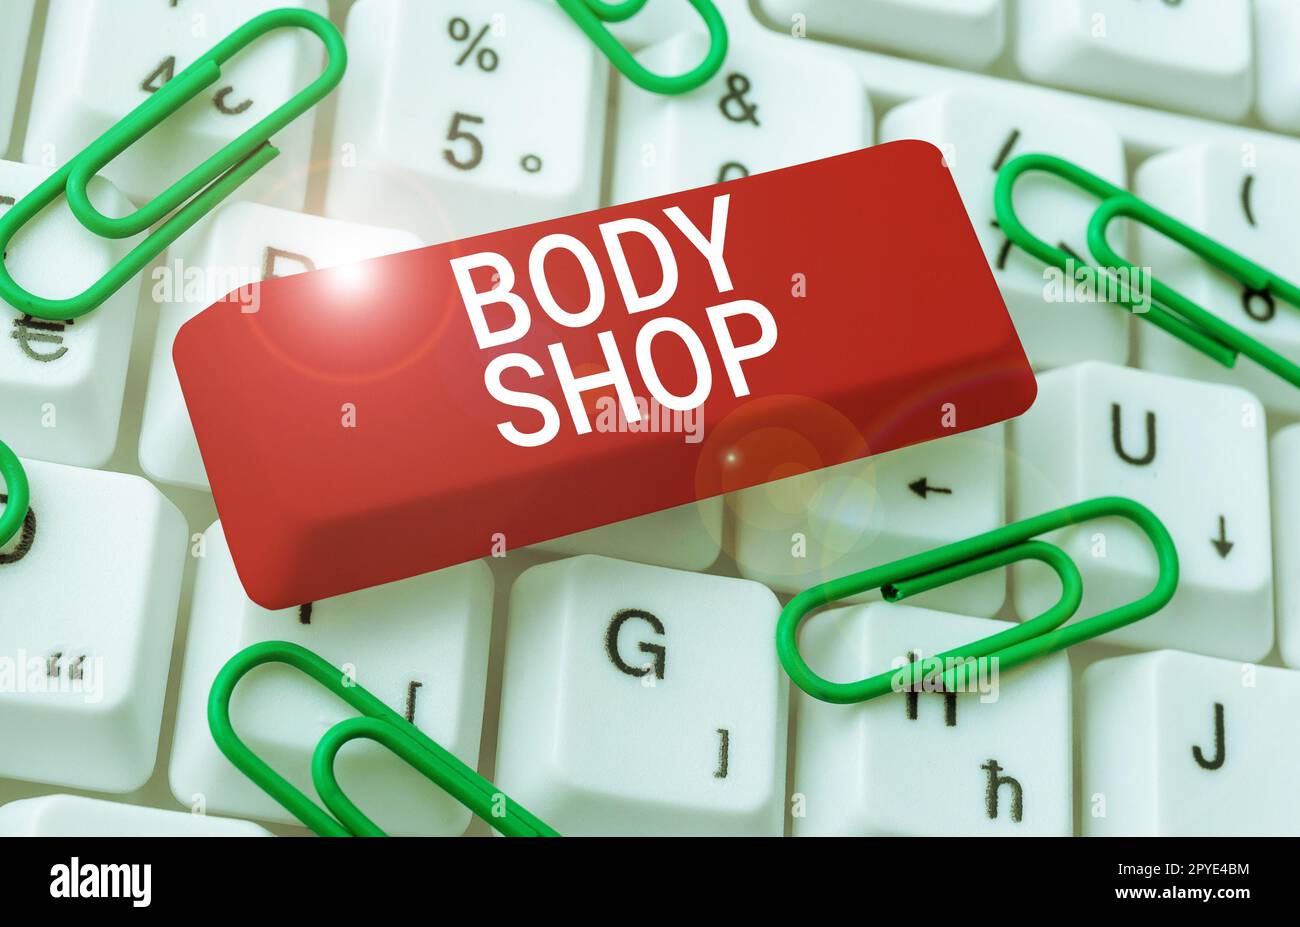 Conceptual caption Body Shop. Word for a shop where automotive bodies are made or repaired Stock Photo